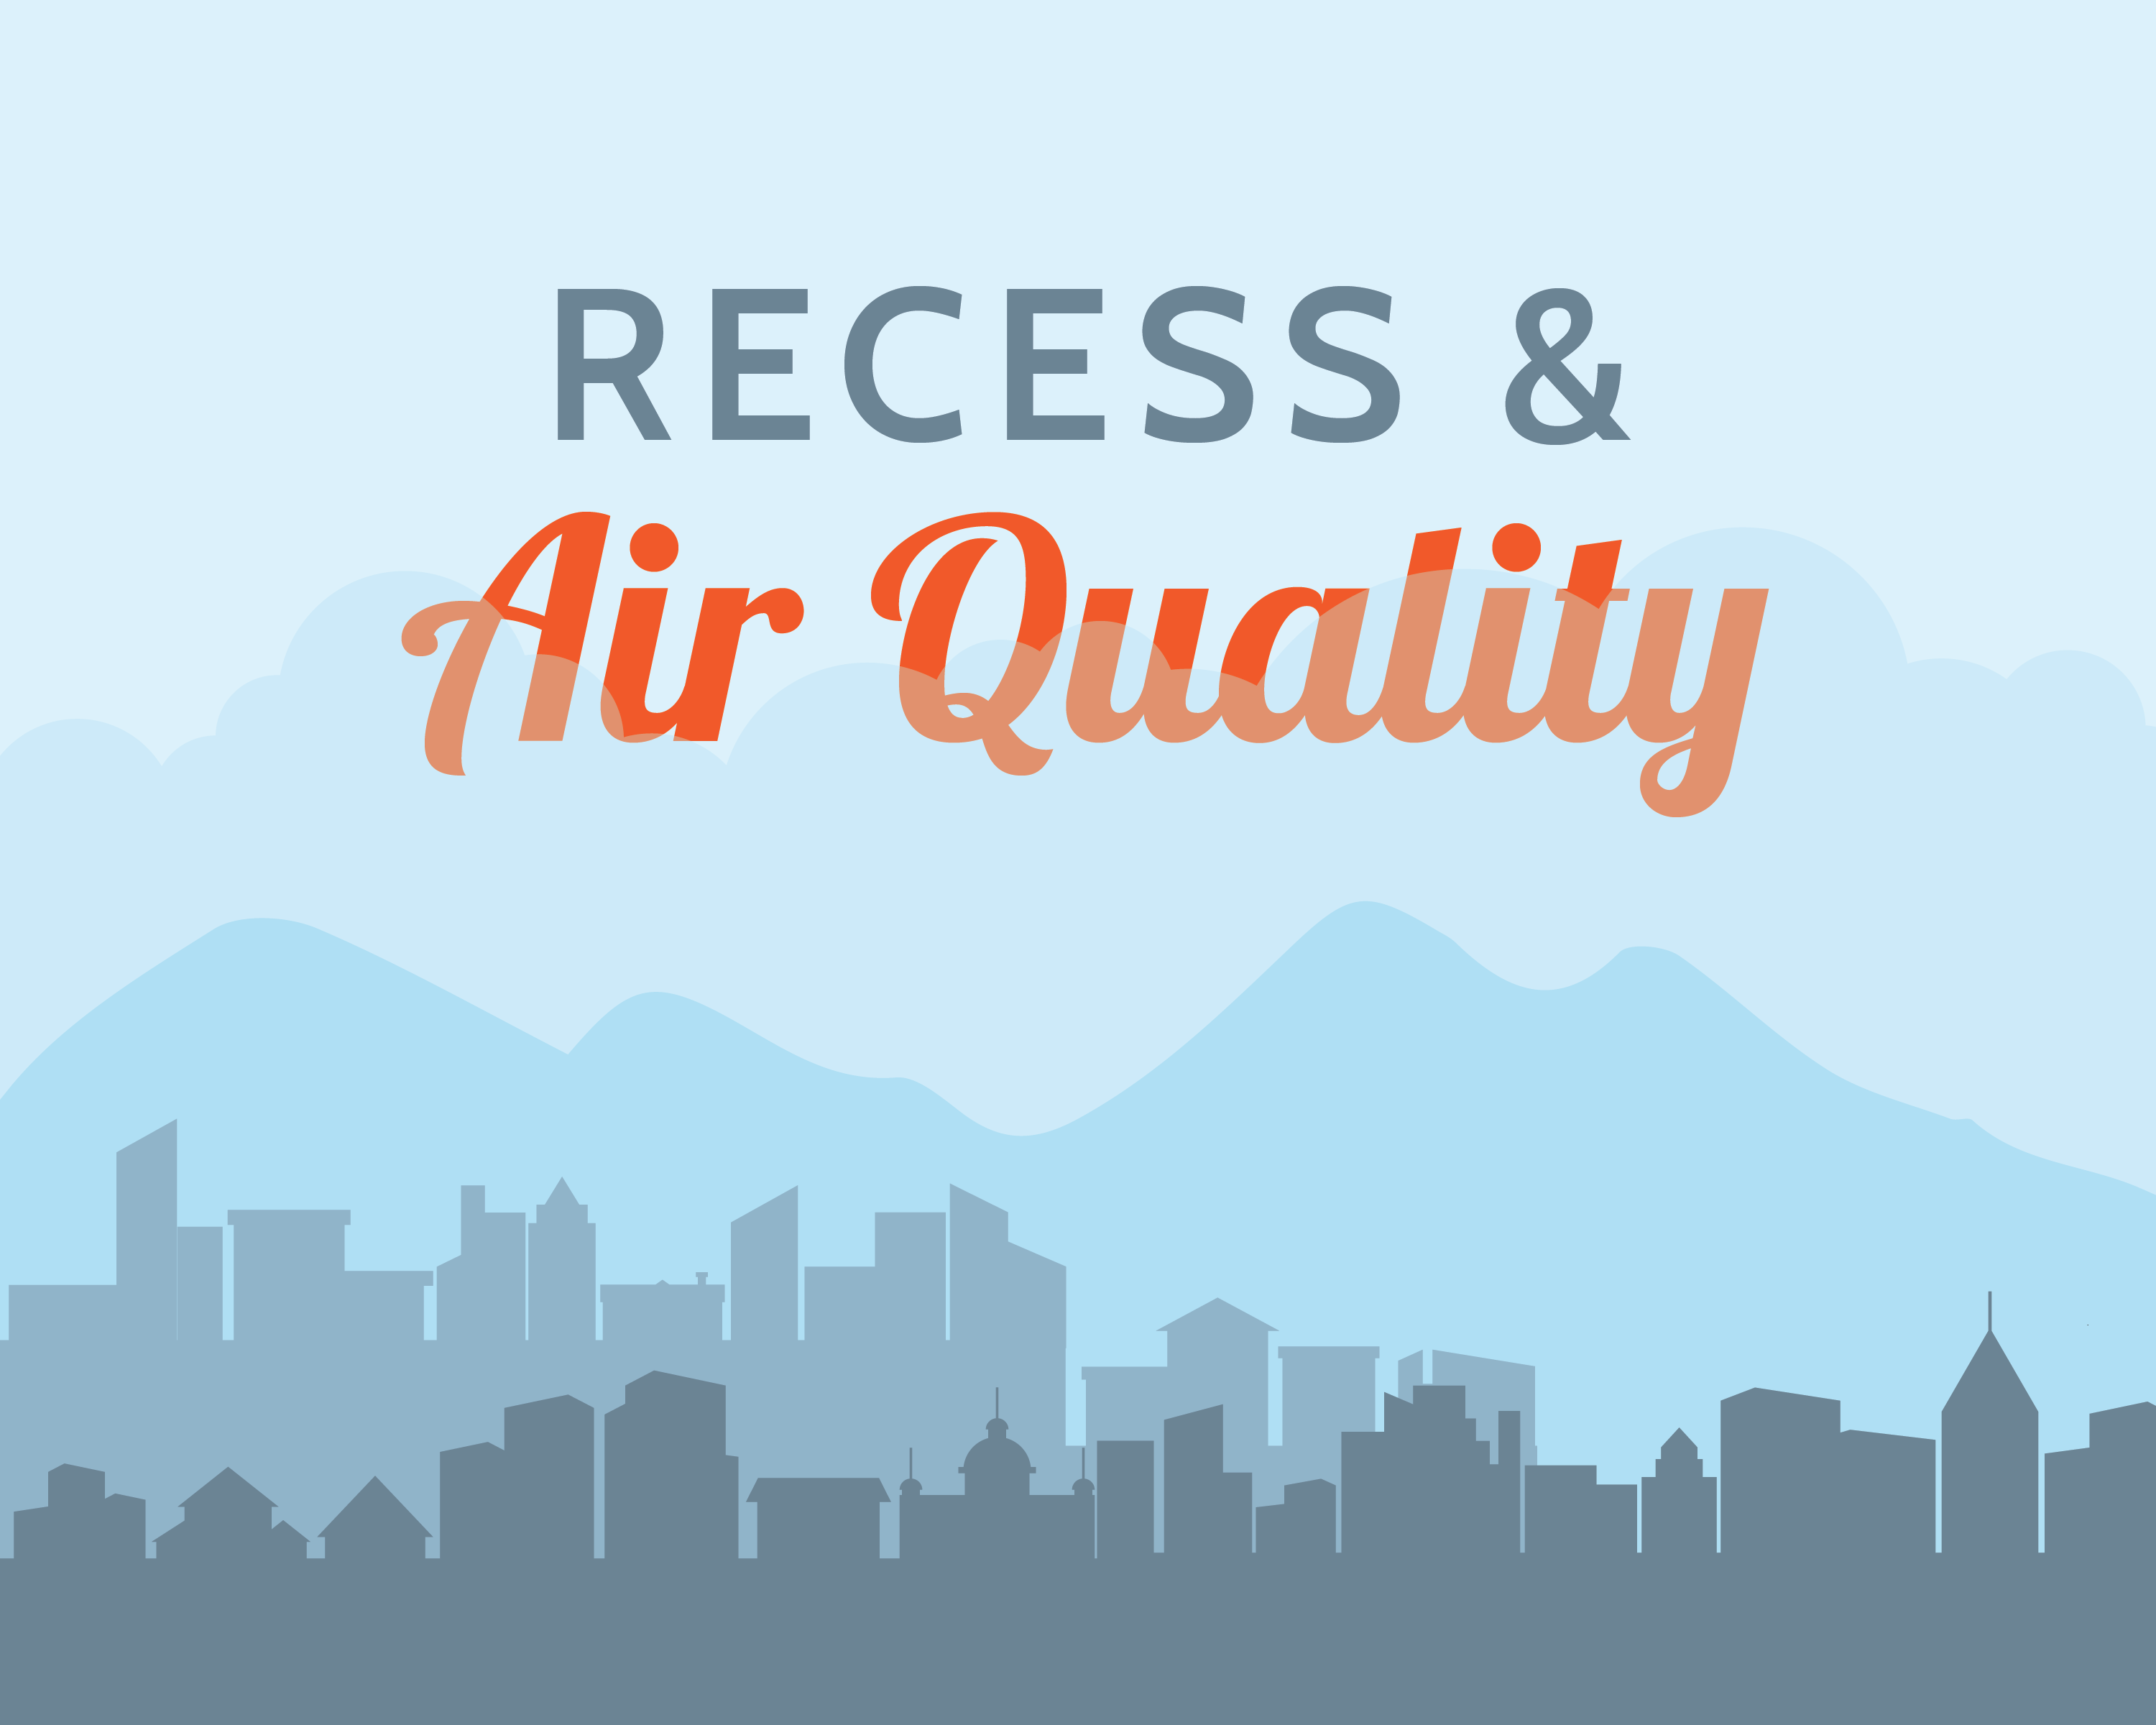 This is how schools make decisions regarding recess and air quality